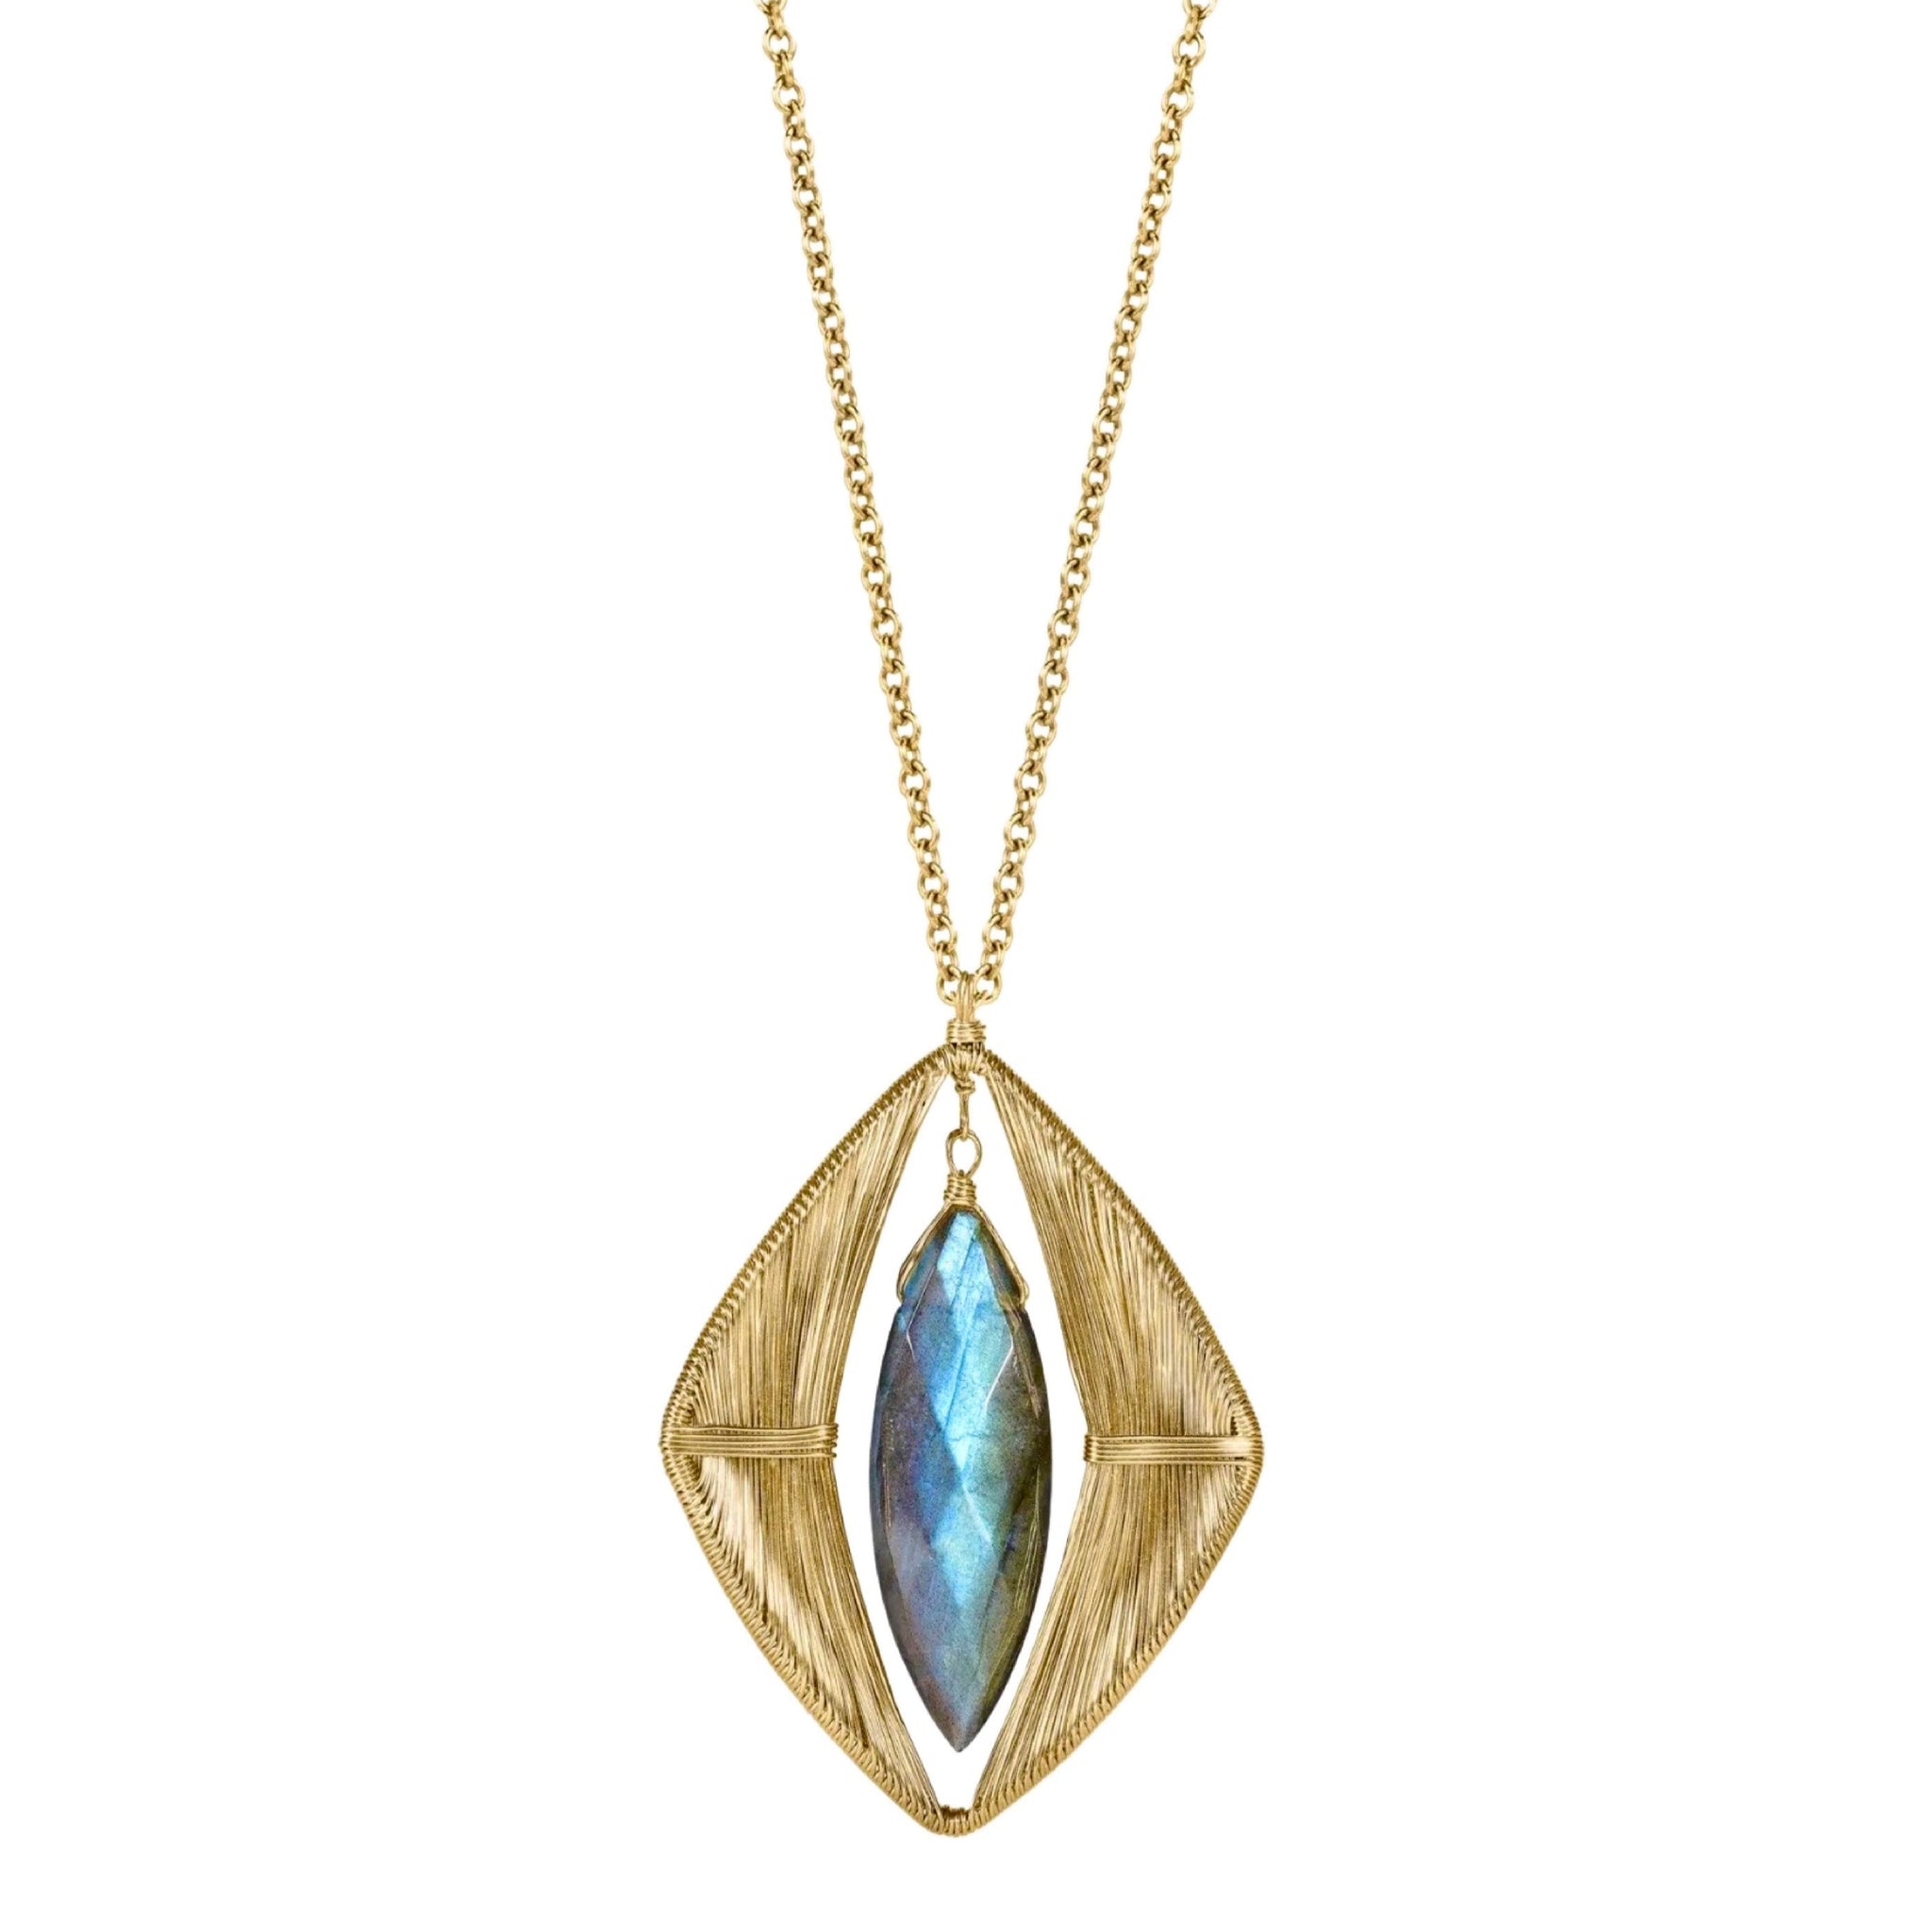 Dana Kellin Showcase Necklace available at Shaylula Jewlery & Gifts in Tarrytown, NY and online. Beautifully detailed striations of fine gauge wire are parted to reveal a dramatic, marquis-shaped labradorite briolette.  • 14k gold fill, labradorite  • 17" L, 1.75" L x 1.25" W pendant  • Lobster clasp